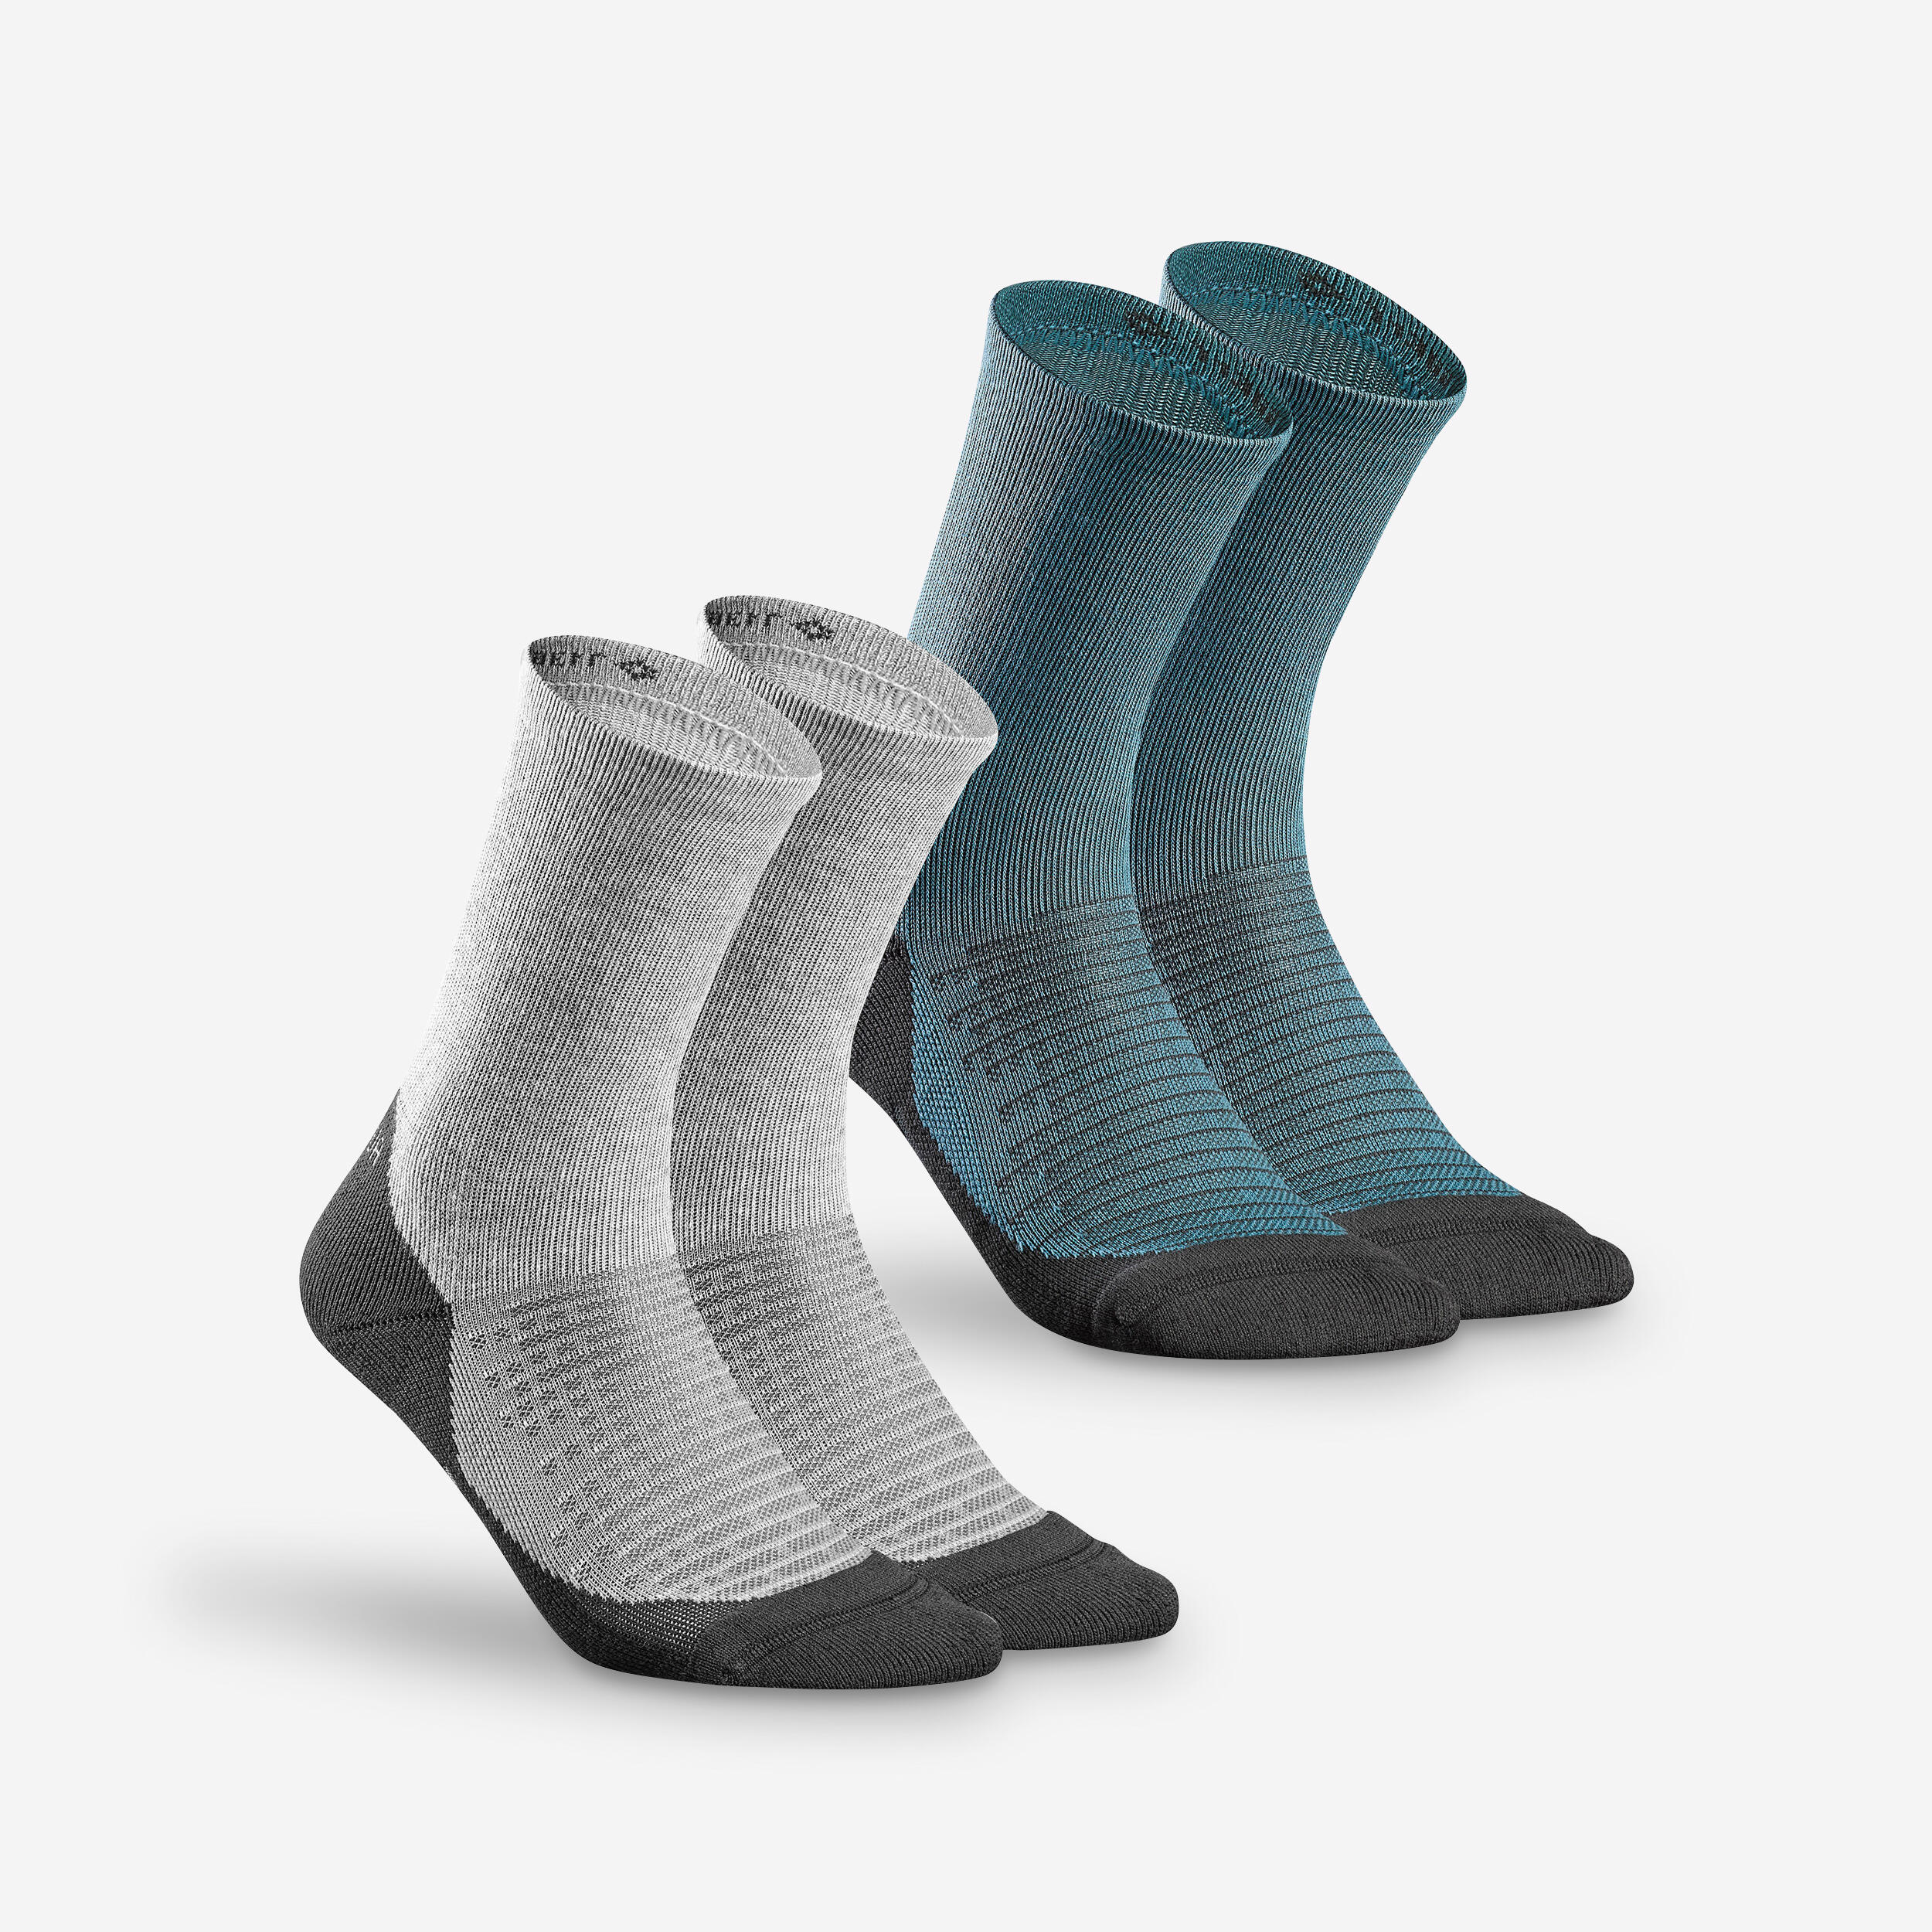 Sock Hike 100 High  - Pack of 2 pairs - Grey and Blue 1/9